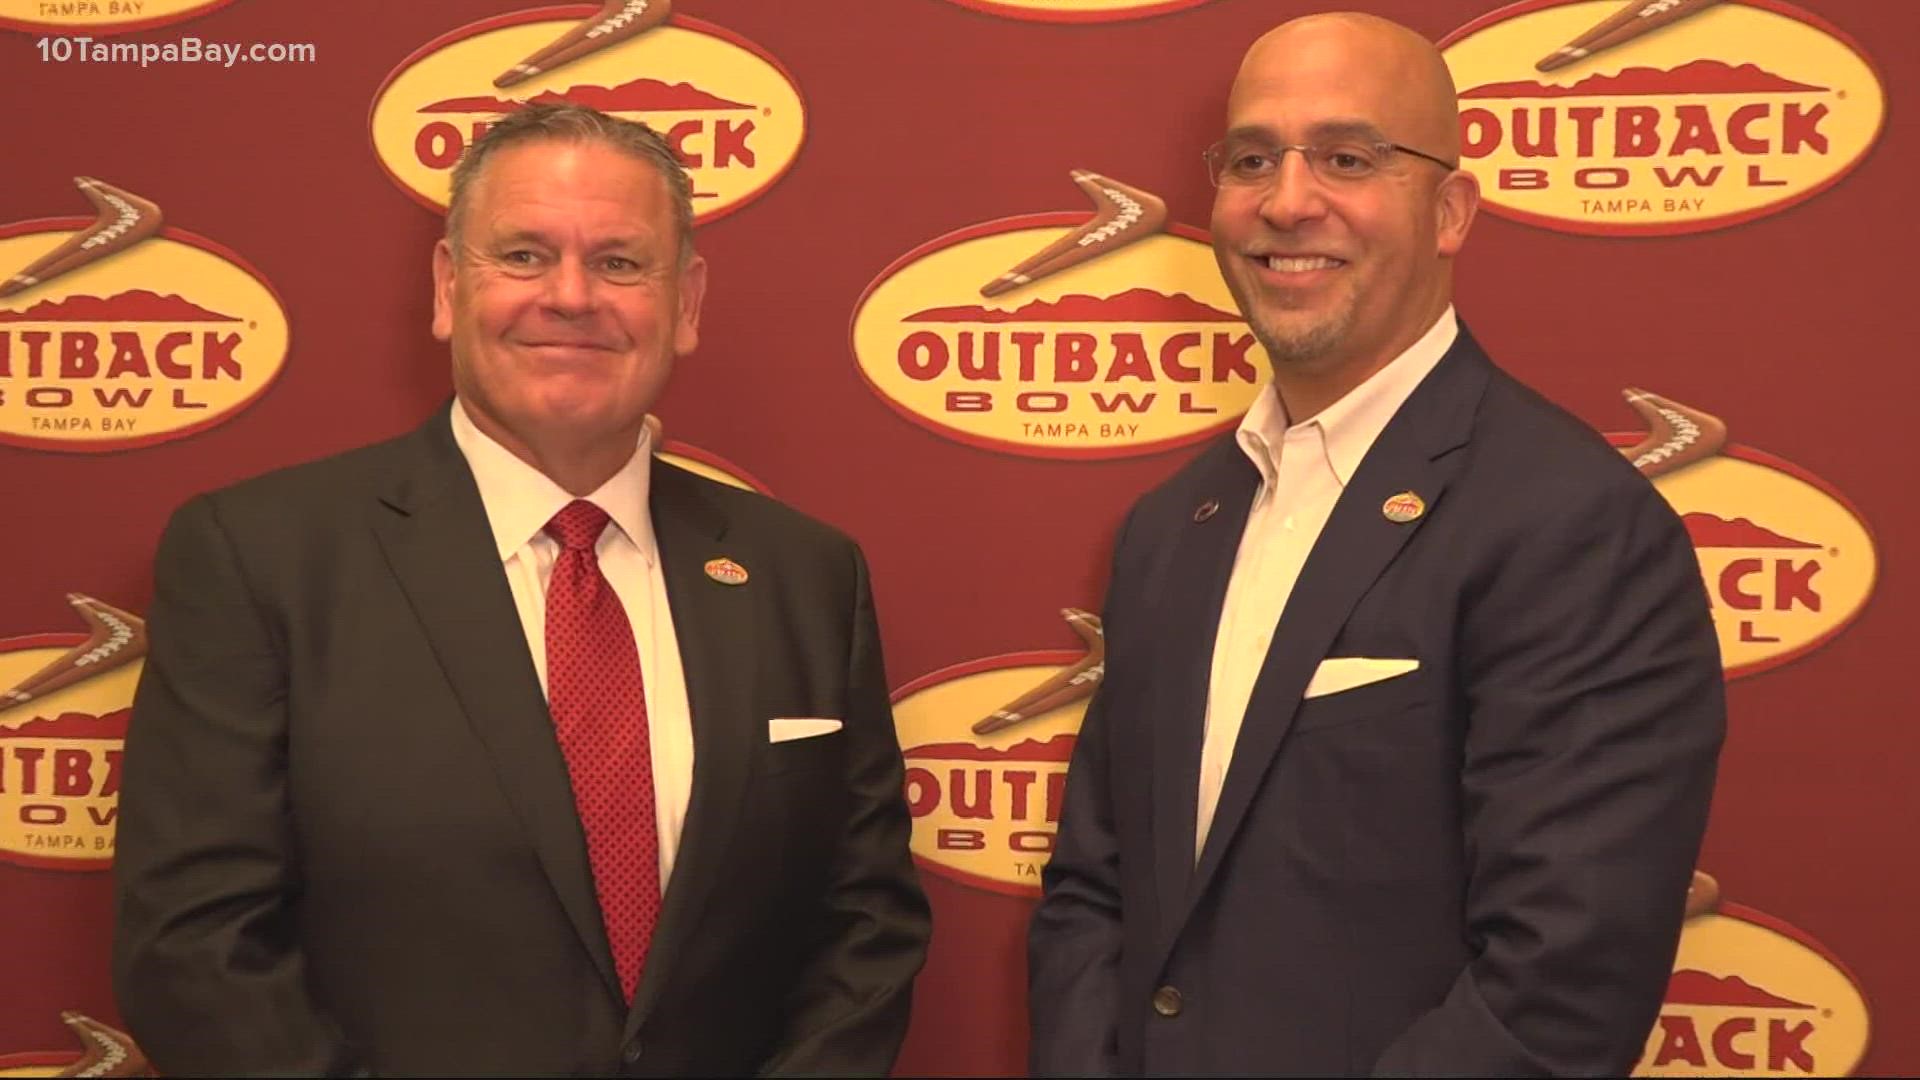 It's going to be a busy time with the Gasparilla Bowl and Outback Bowl coming to the Tampa Bay area.